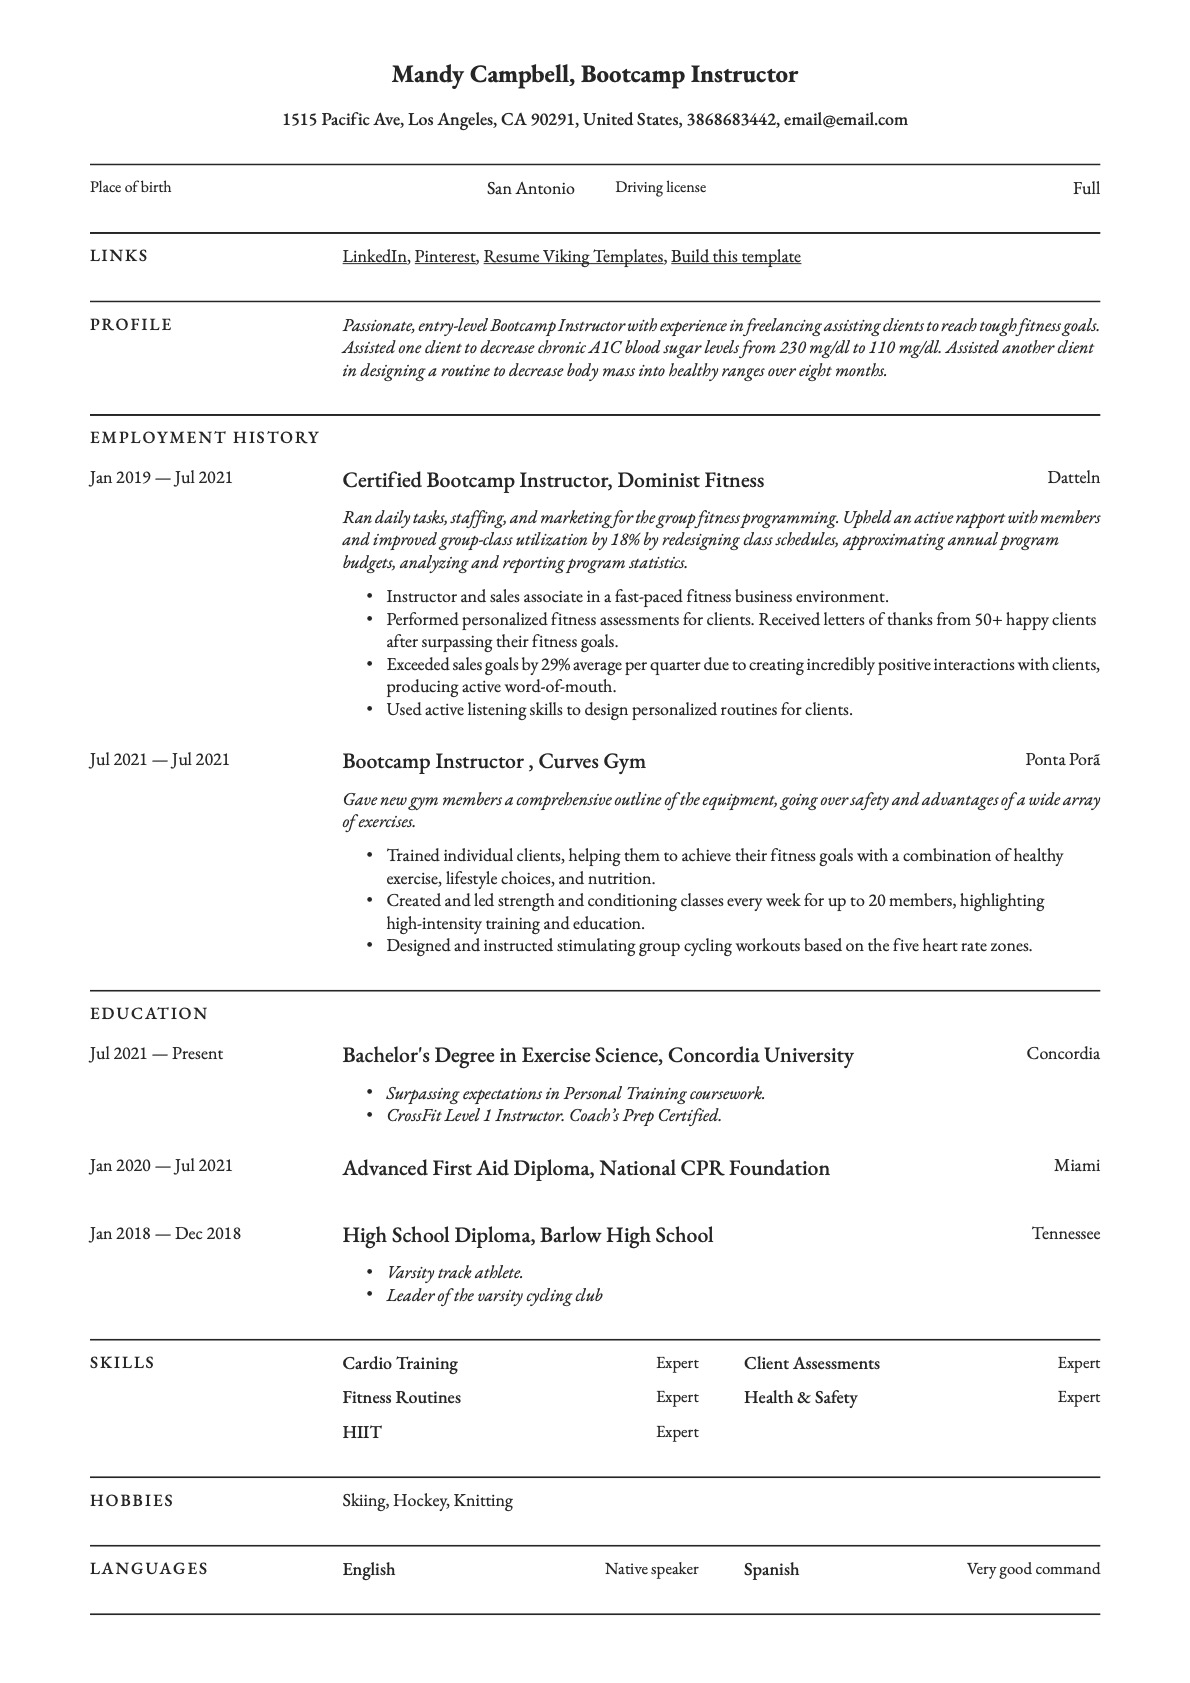 Professional Bootcamp Instructor Resume Template